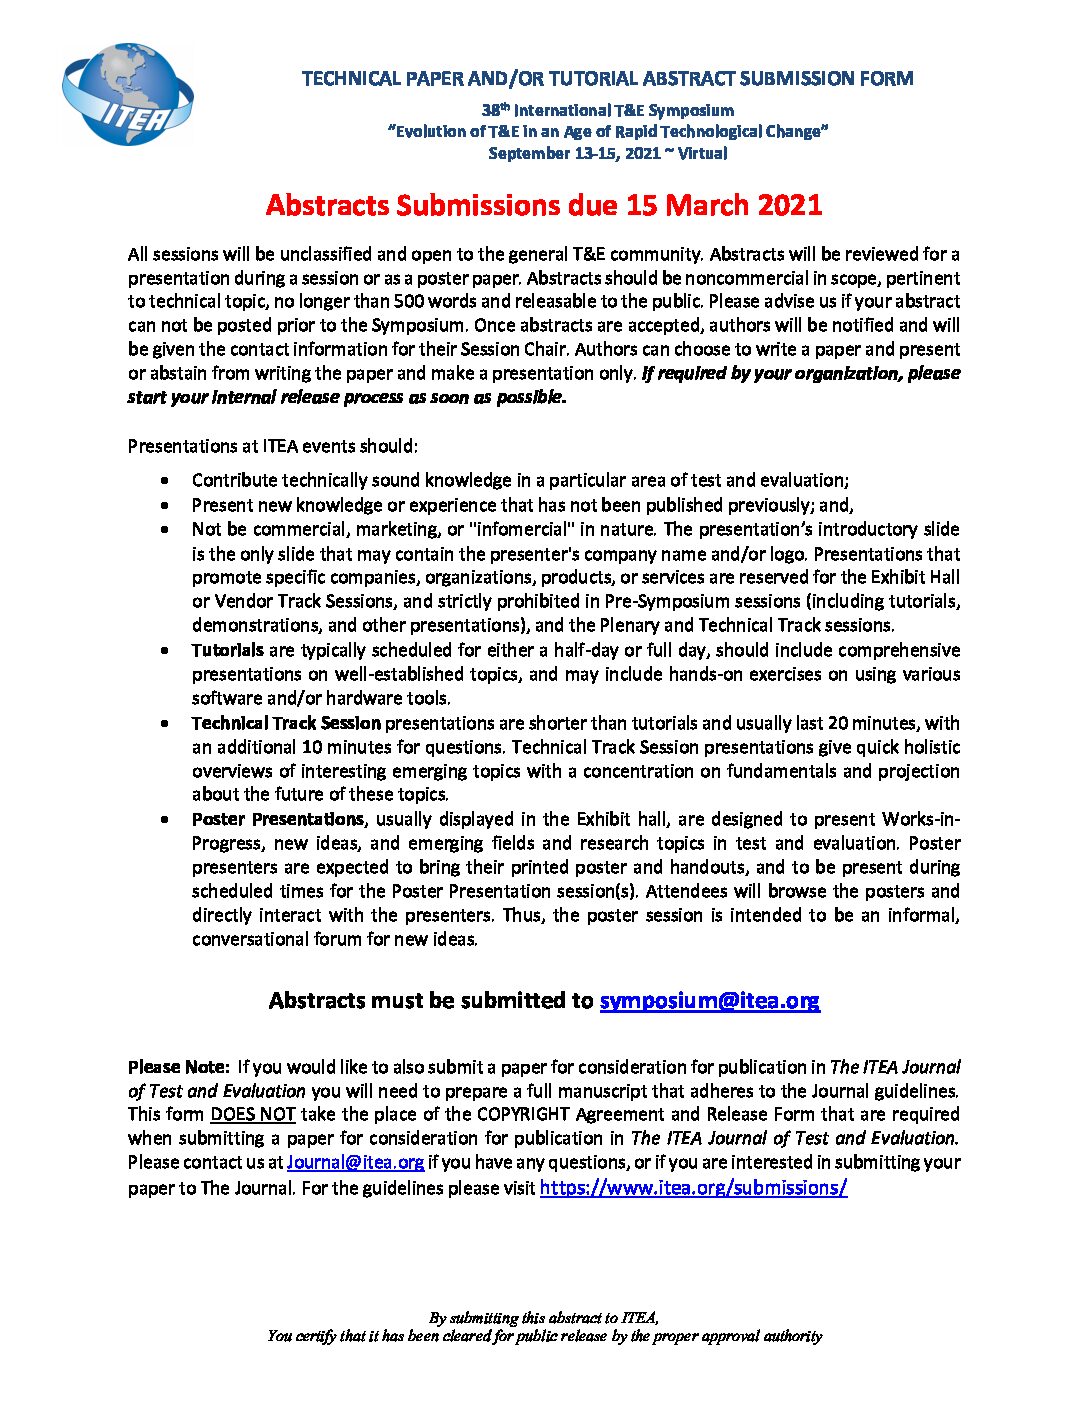 2021-Symposium-Abstract-Submission-Form_updated